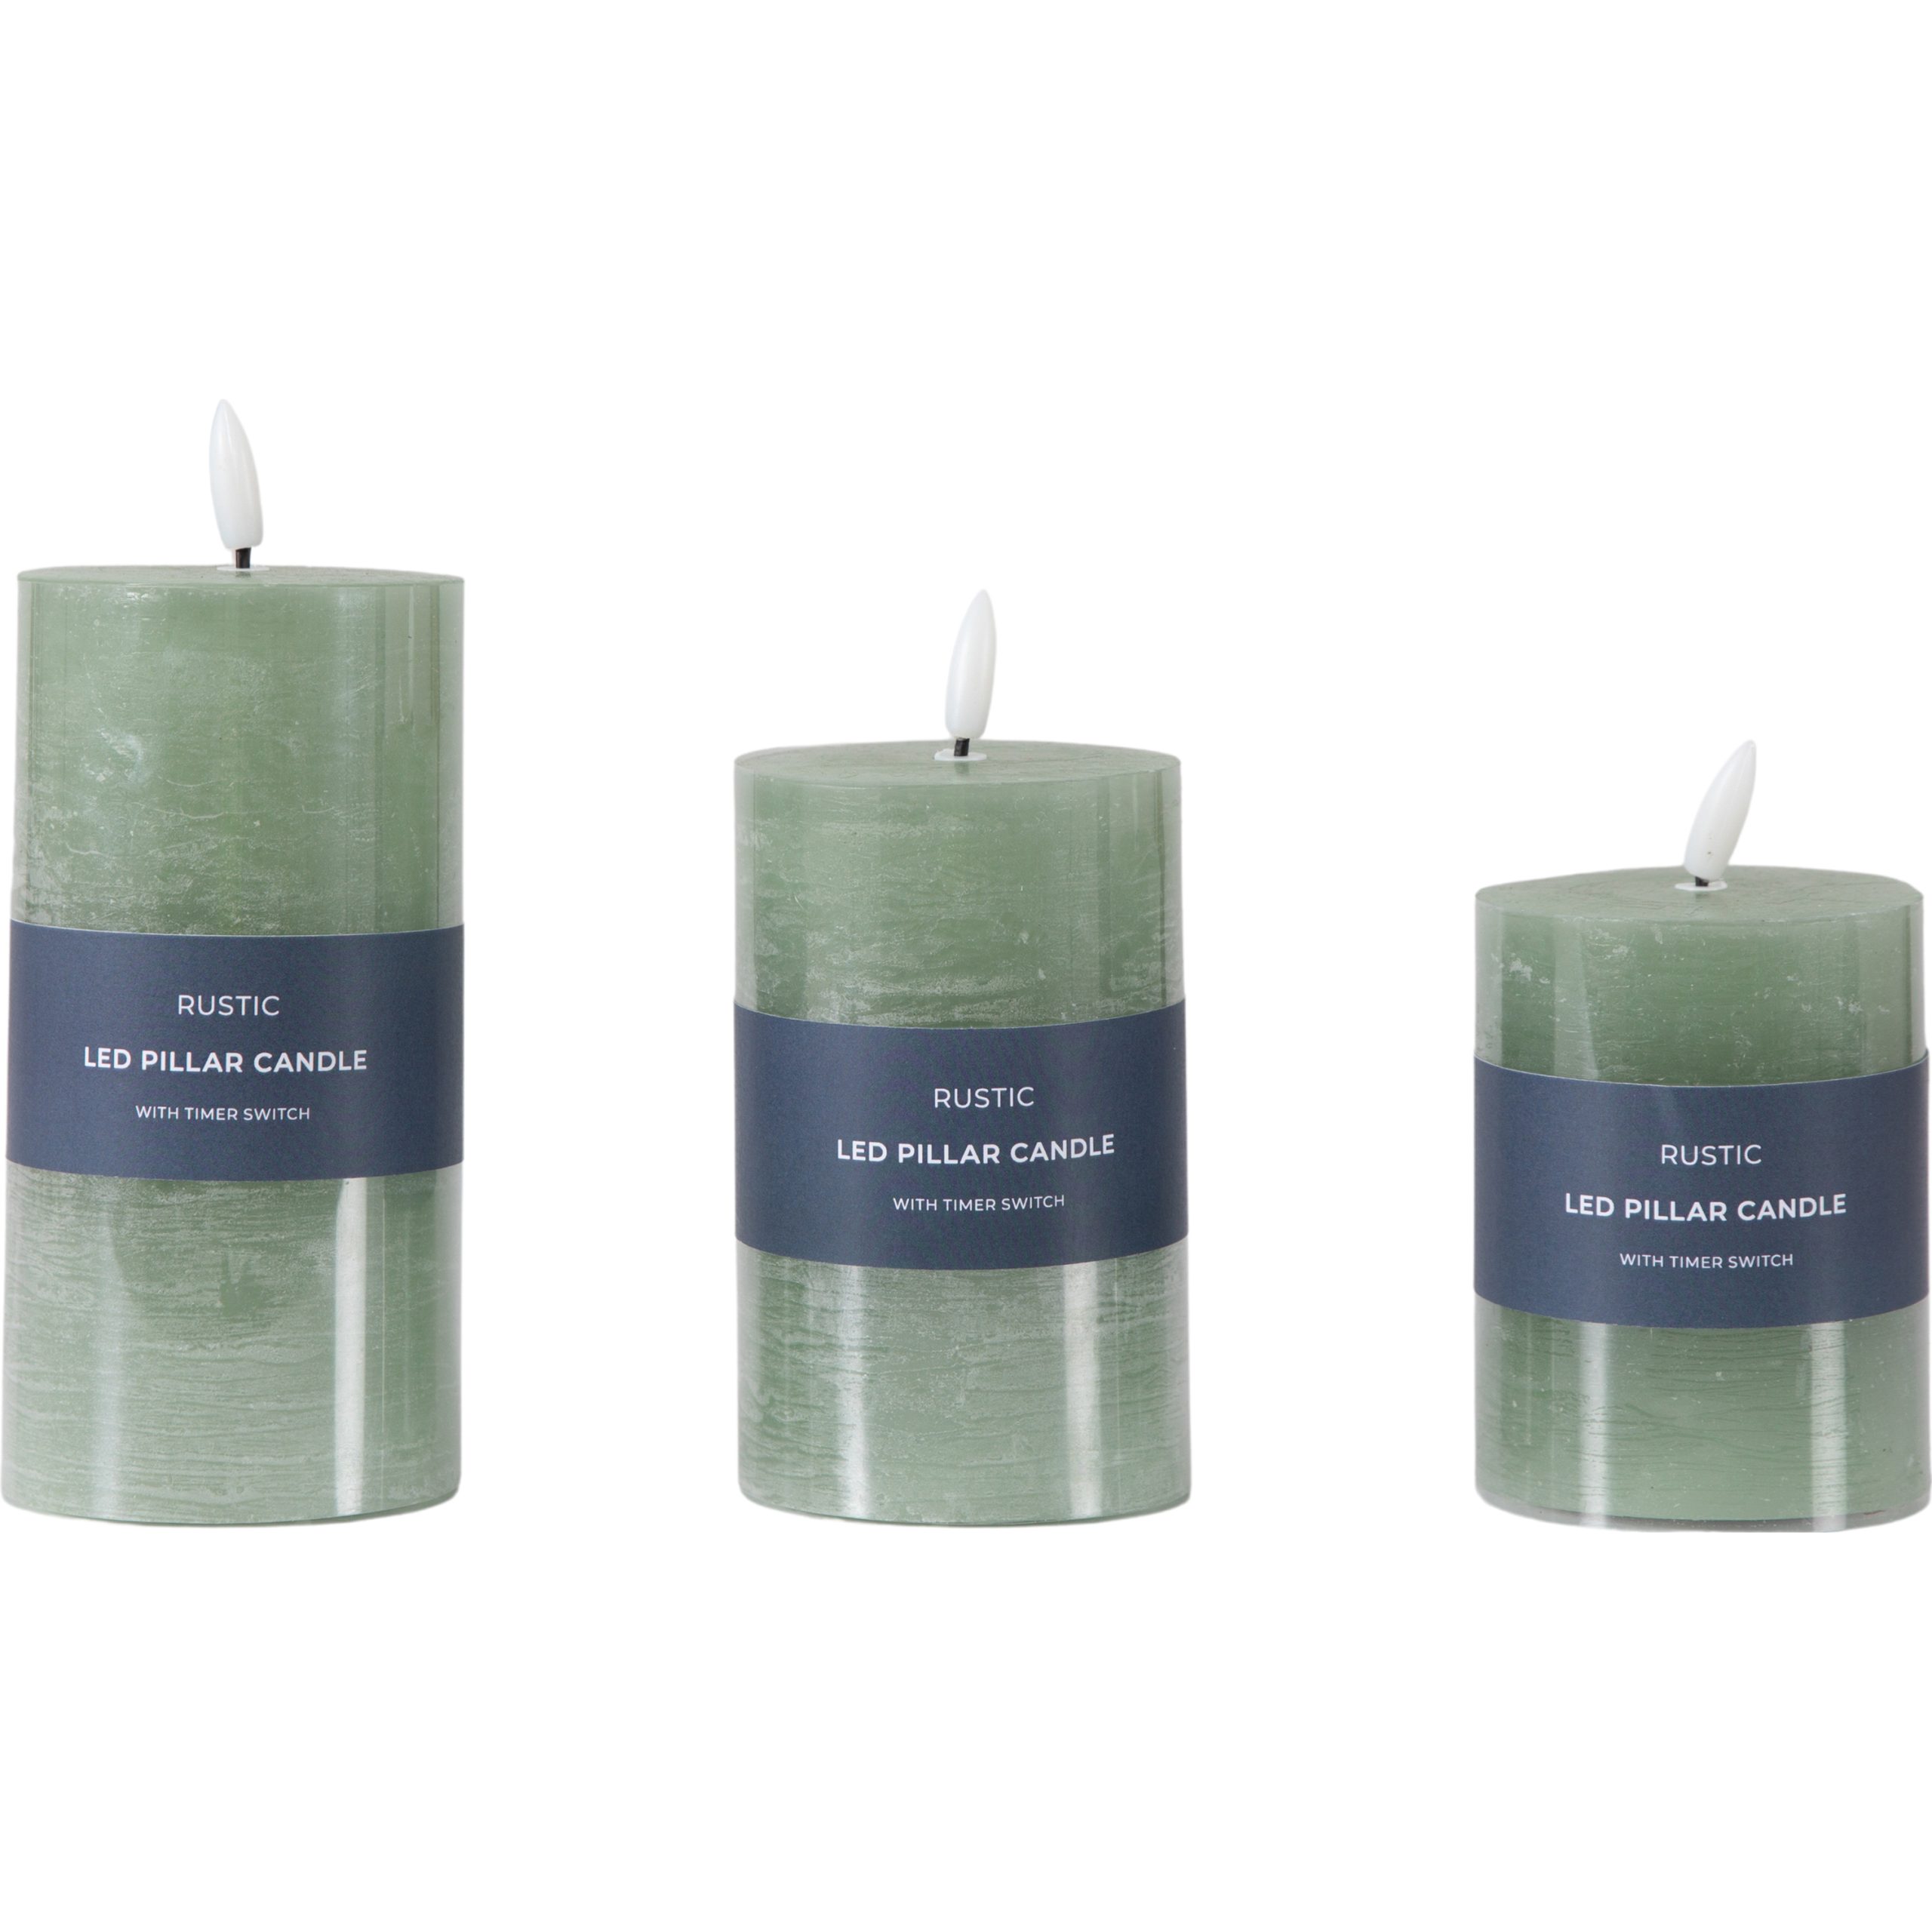 Gallery Direct LED Candle Rustic Sage (Set of 3)